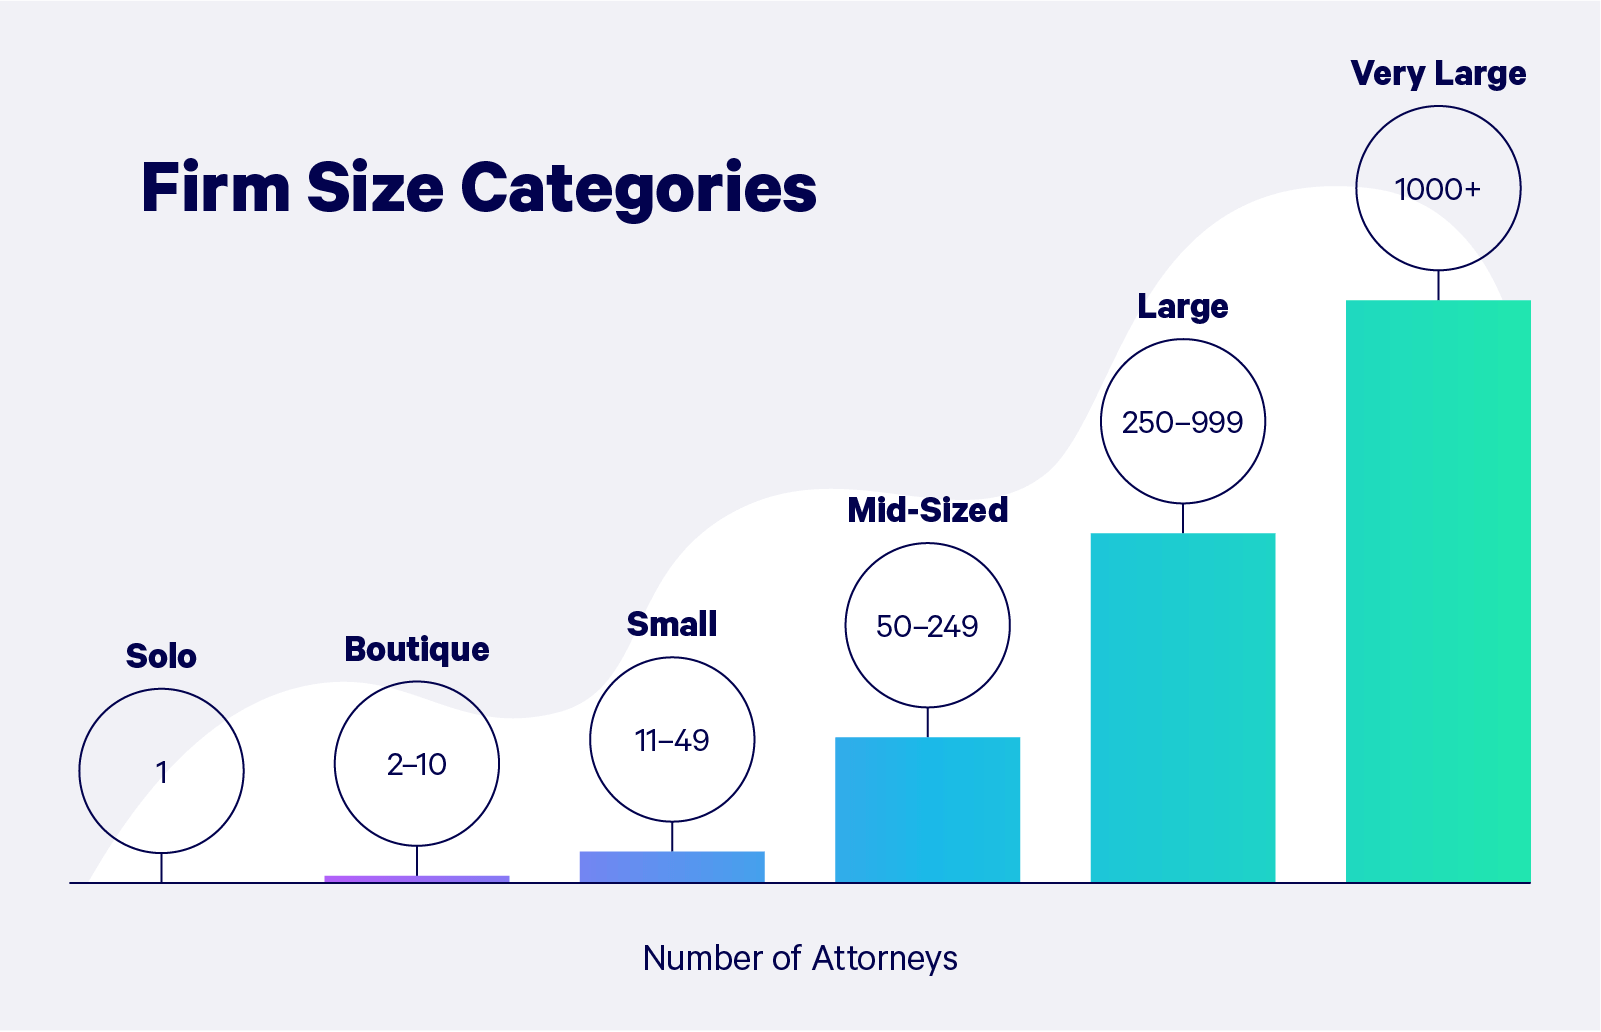 Bar chart of firm sizes represented in these results